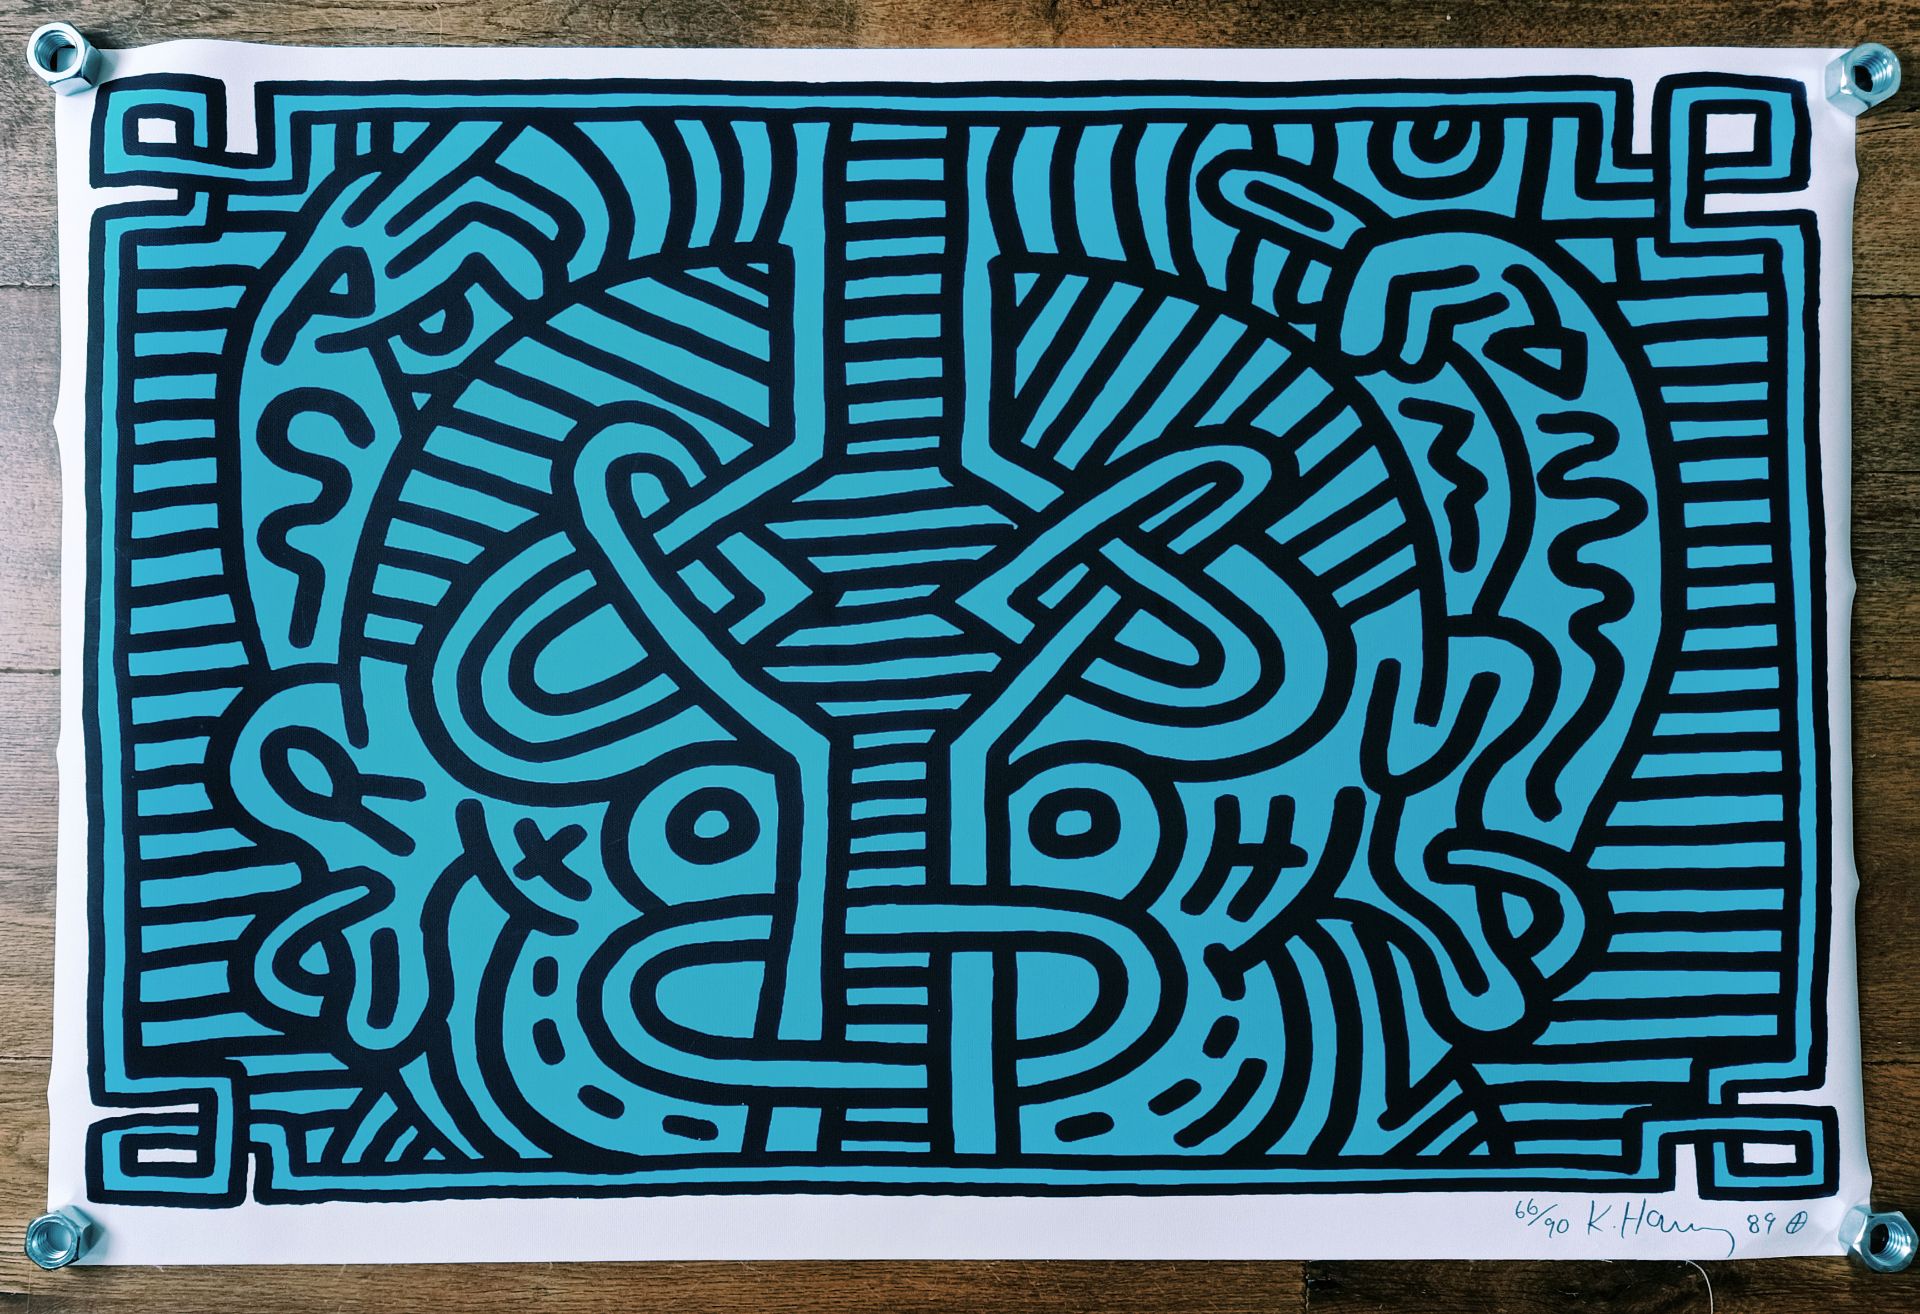 Keith Haring (Attributed) 5 Canvas Posters 1988 (#0326) - Image 5 of 5